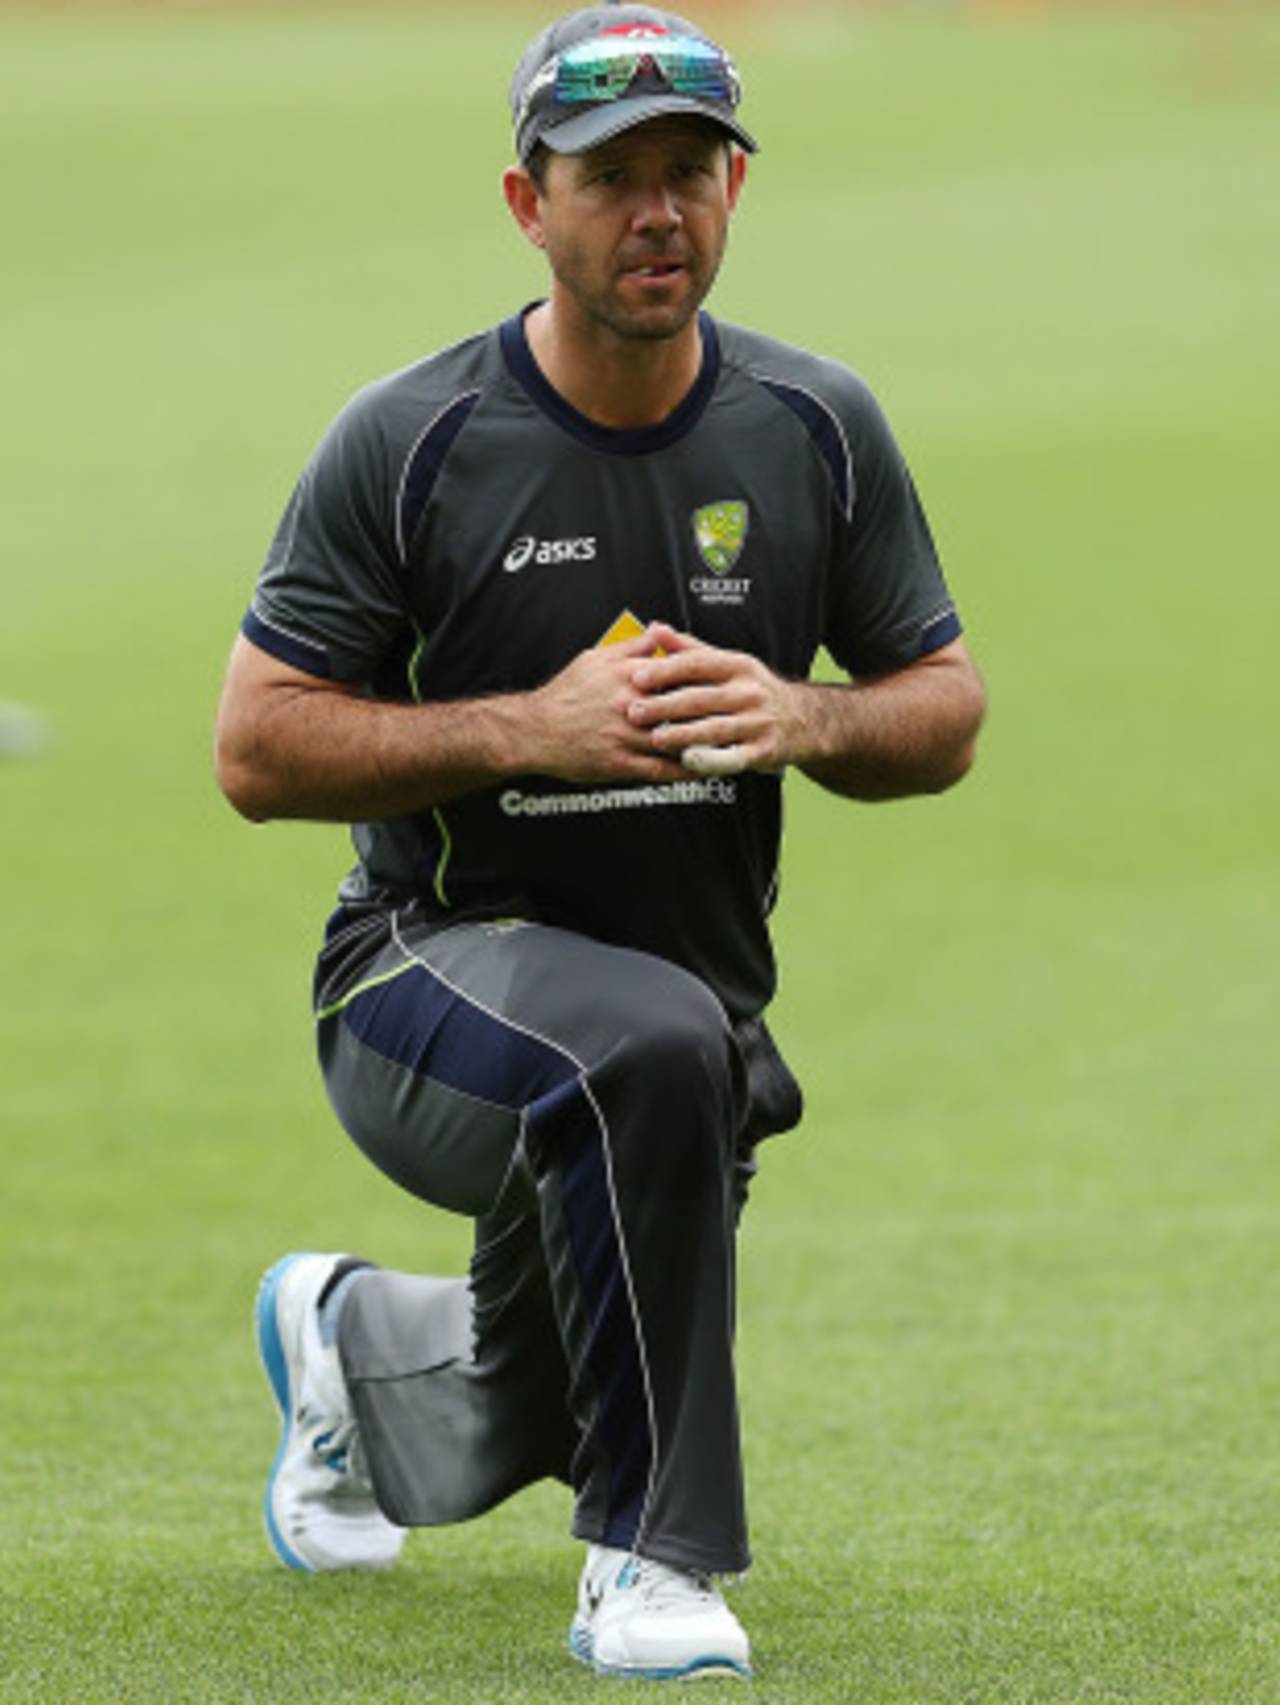 Ricky Ponting stretches in a training session, Brisbane, November 7, 2012